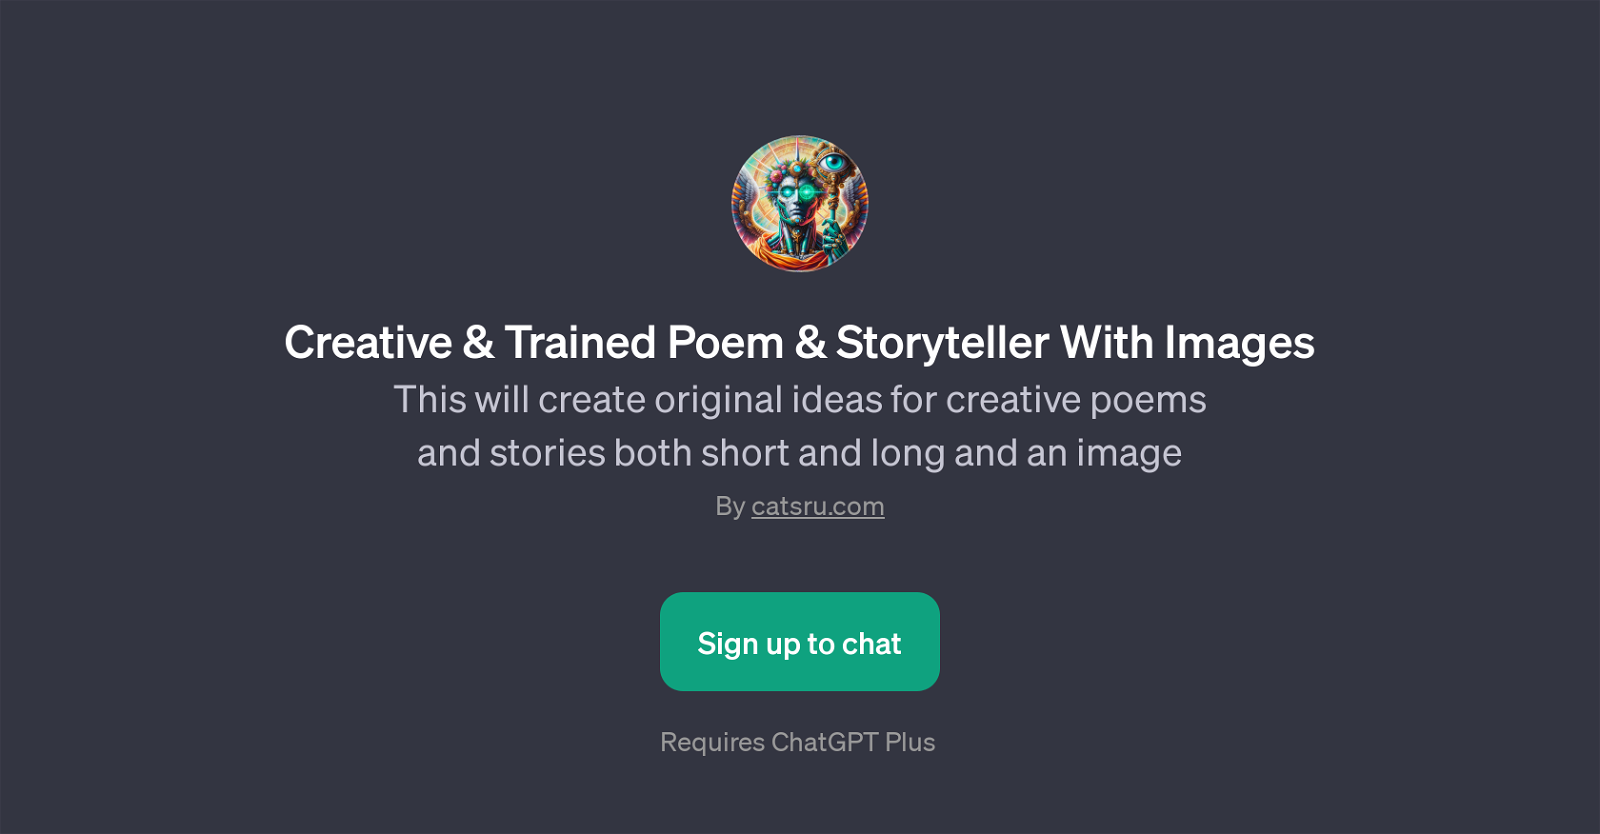 Creative & Trained Poem & Storyteller With Images website